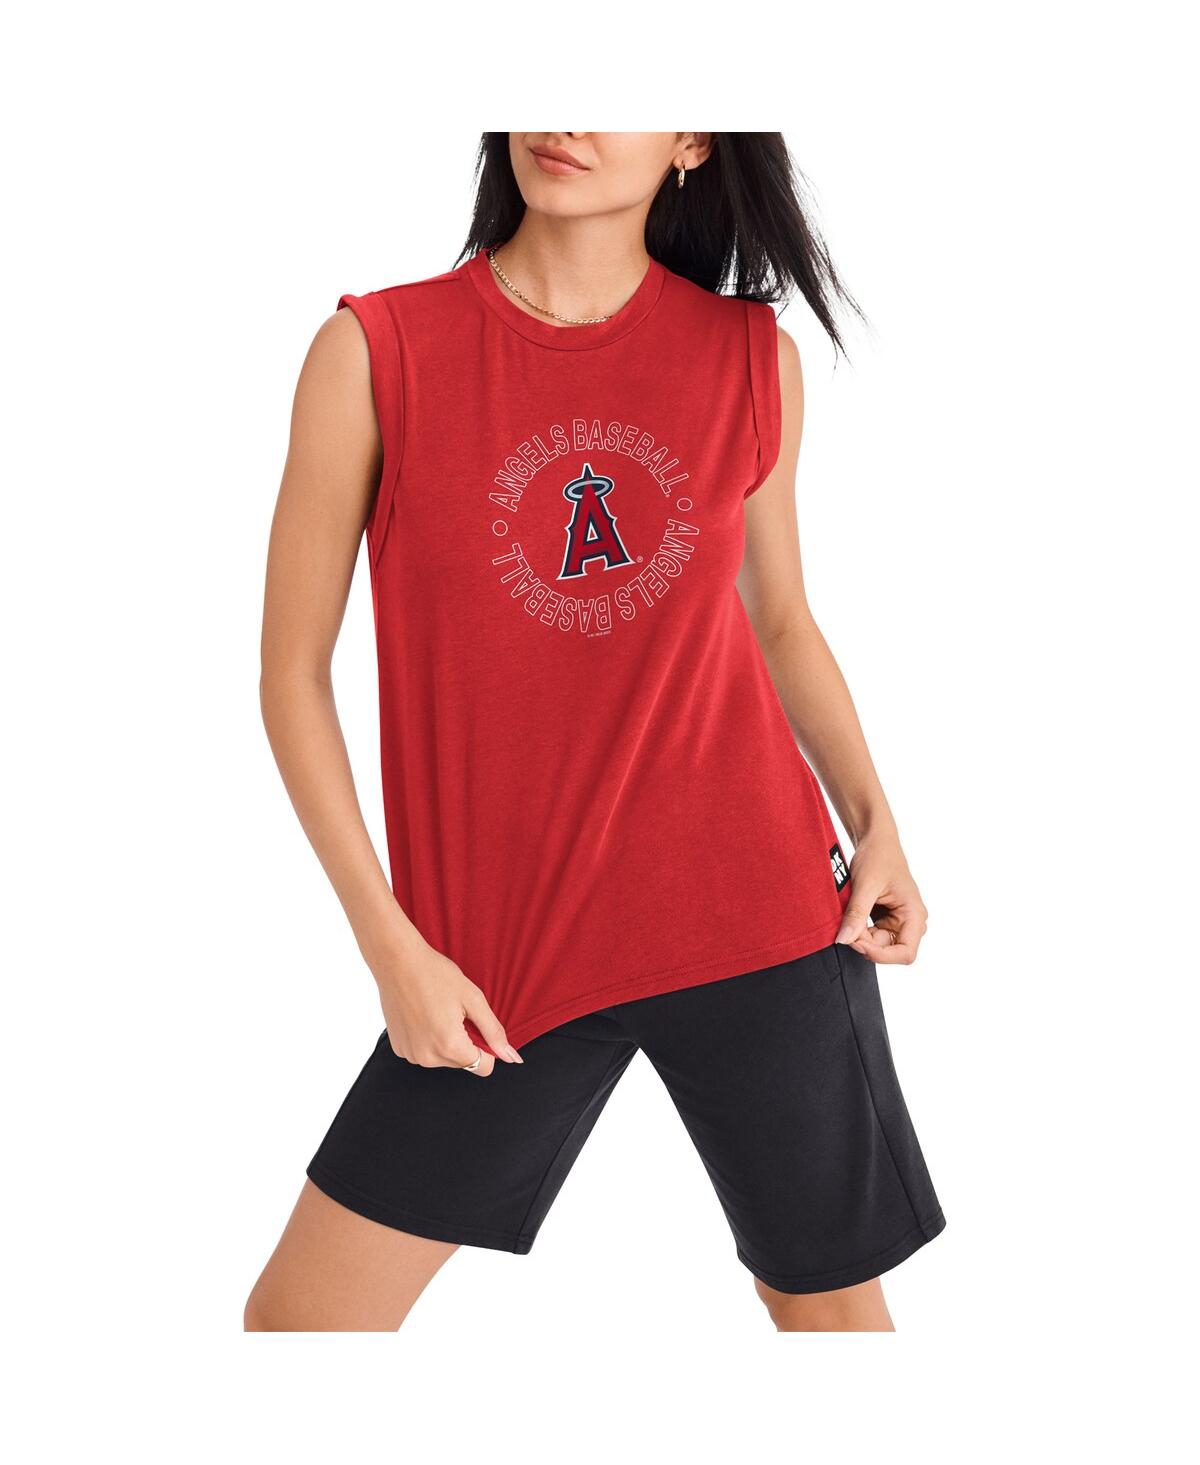 Dkny Women's  Sport Red Los Angeles Angels Madison Tri-blend Tank Top